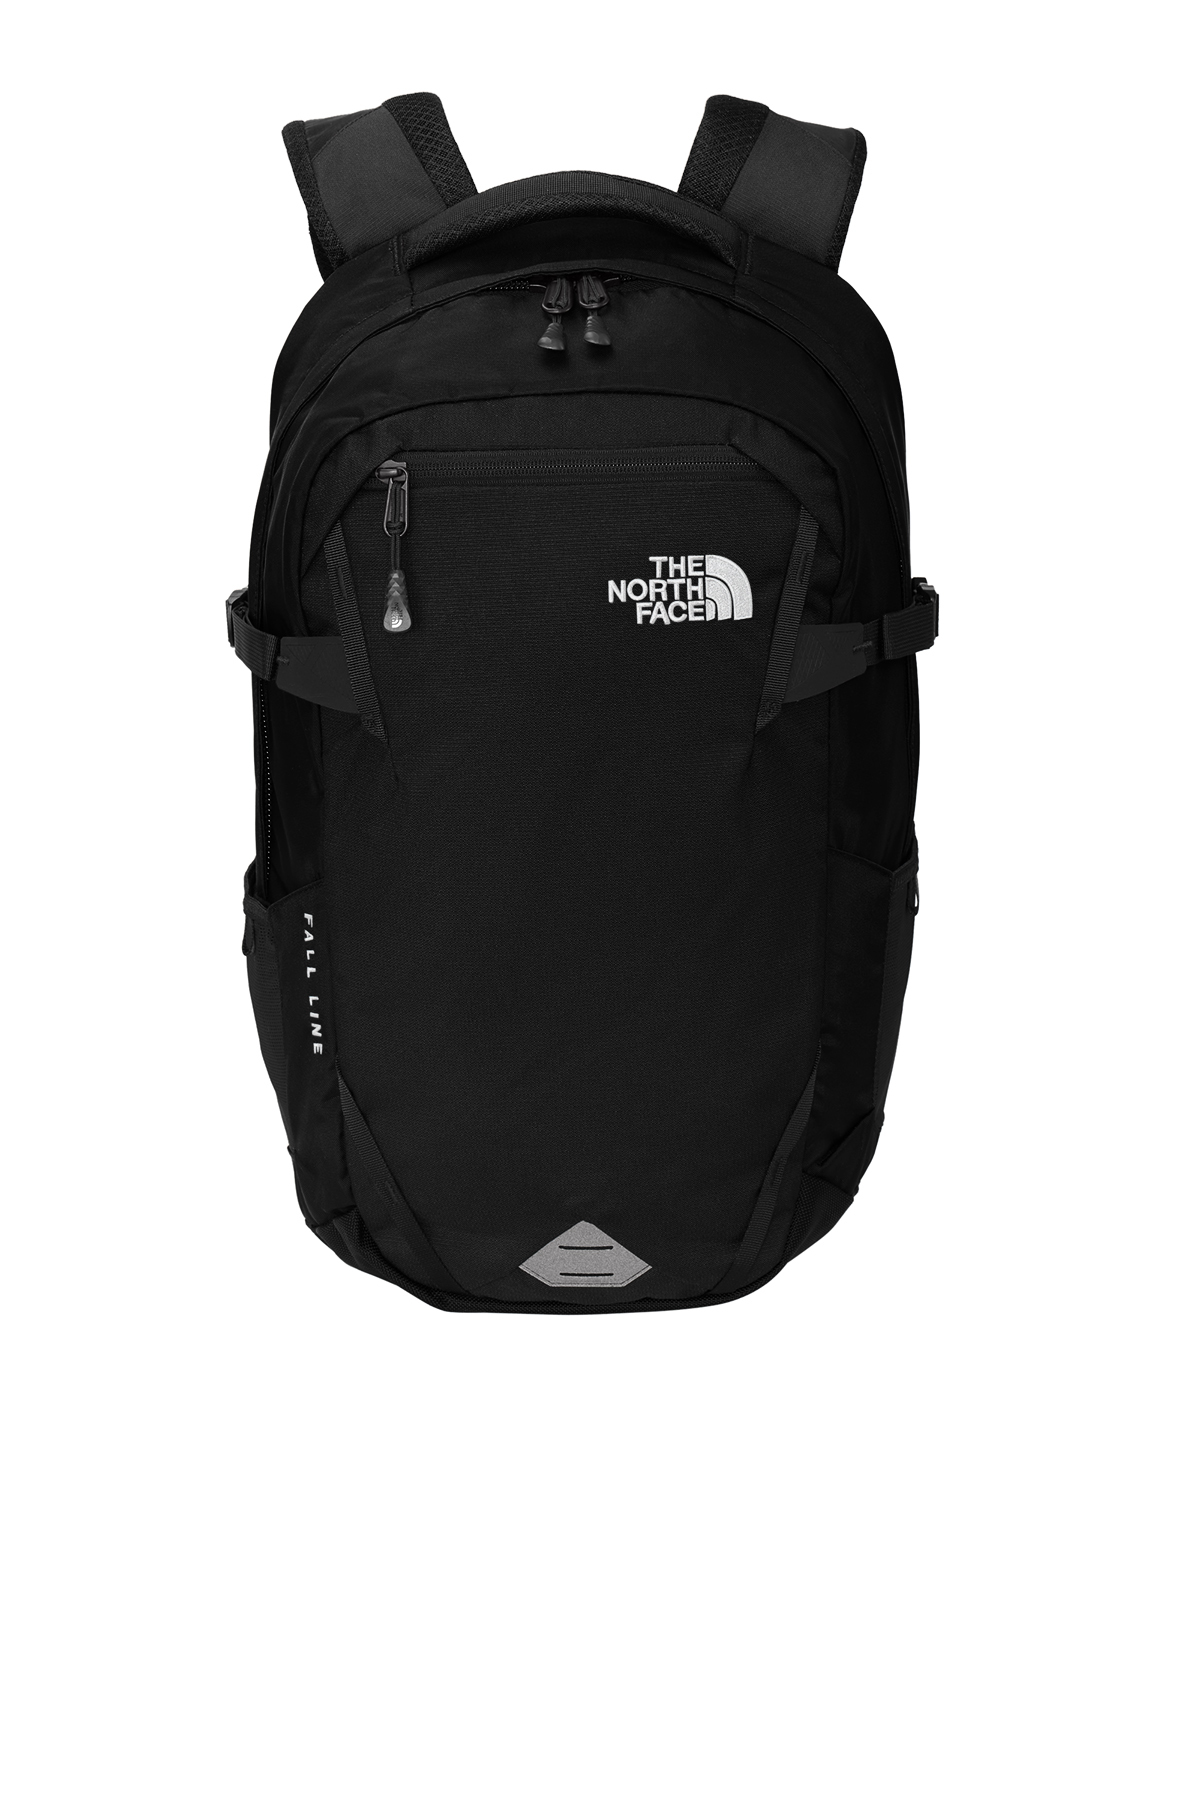 The North Face Fall Line Backpack | Product | SanMar